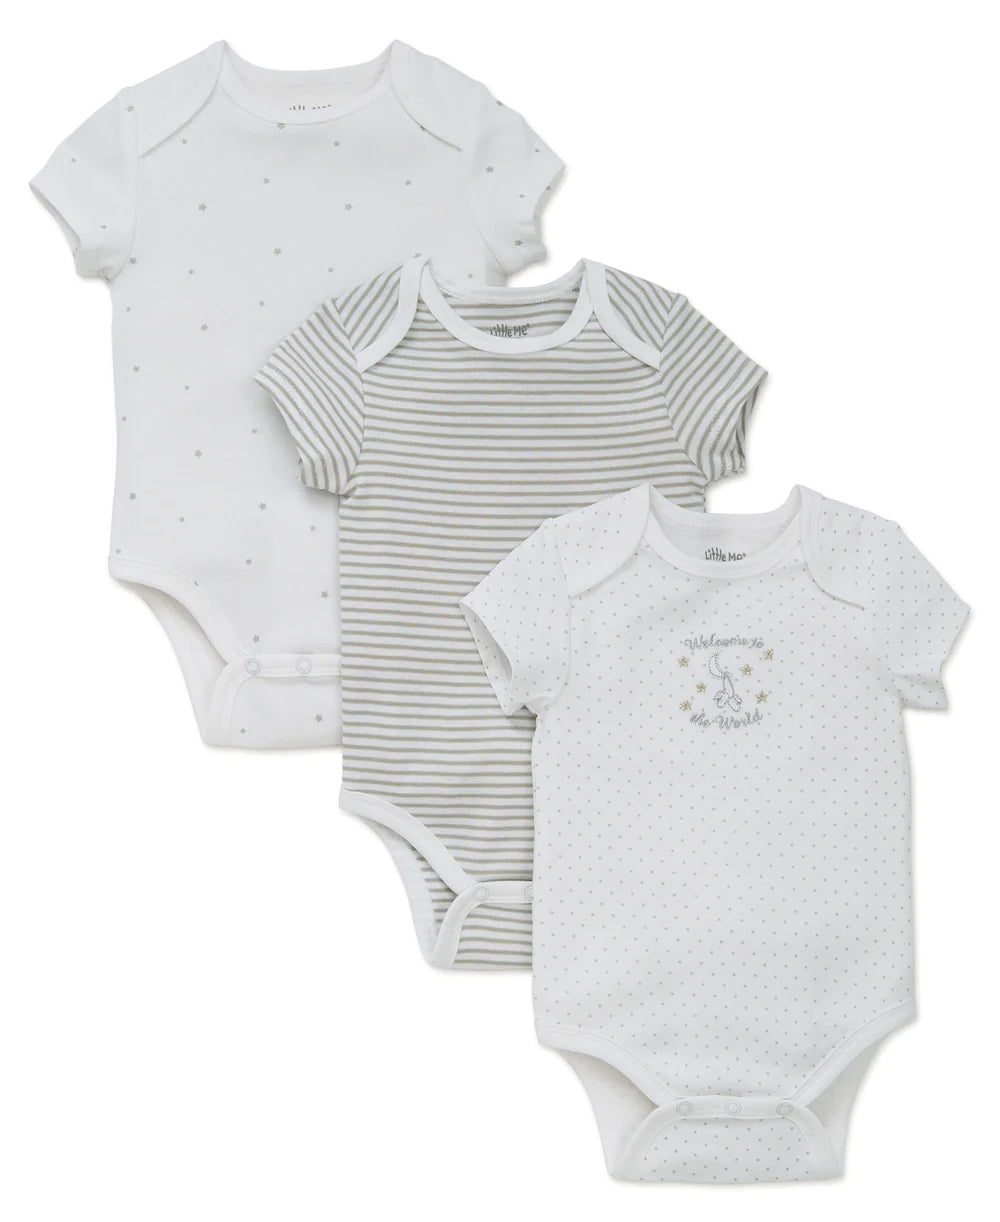 Welcome World 3-Pack Bodysuit